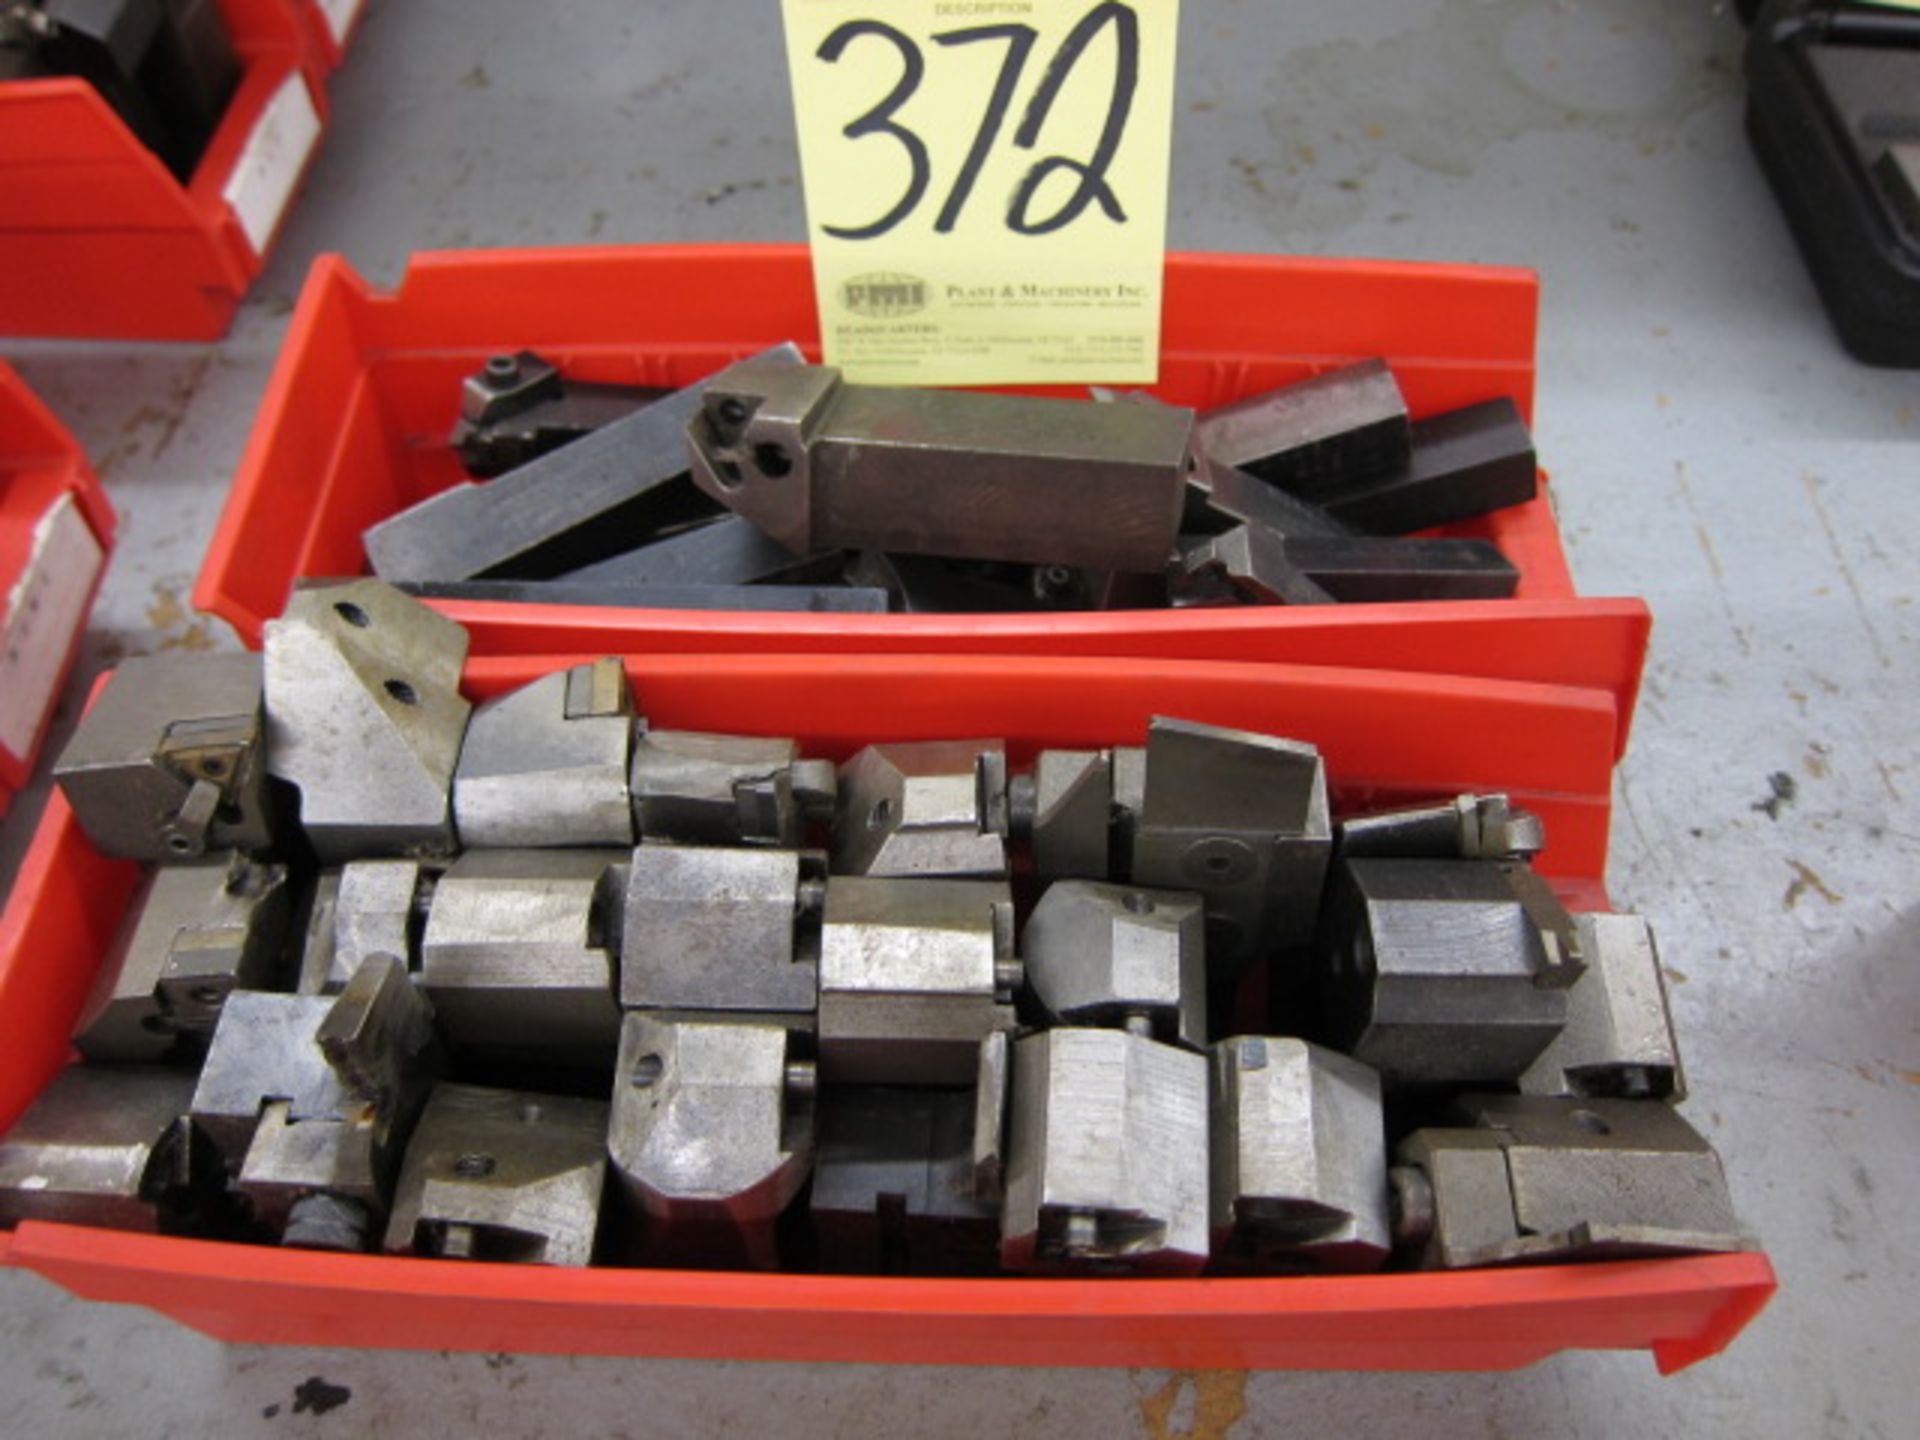 LOT OF INSERT TOOLHOLDERS (in two boxes)